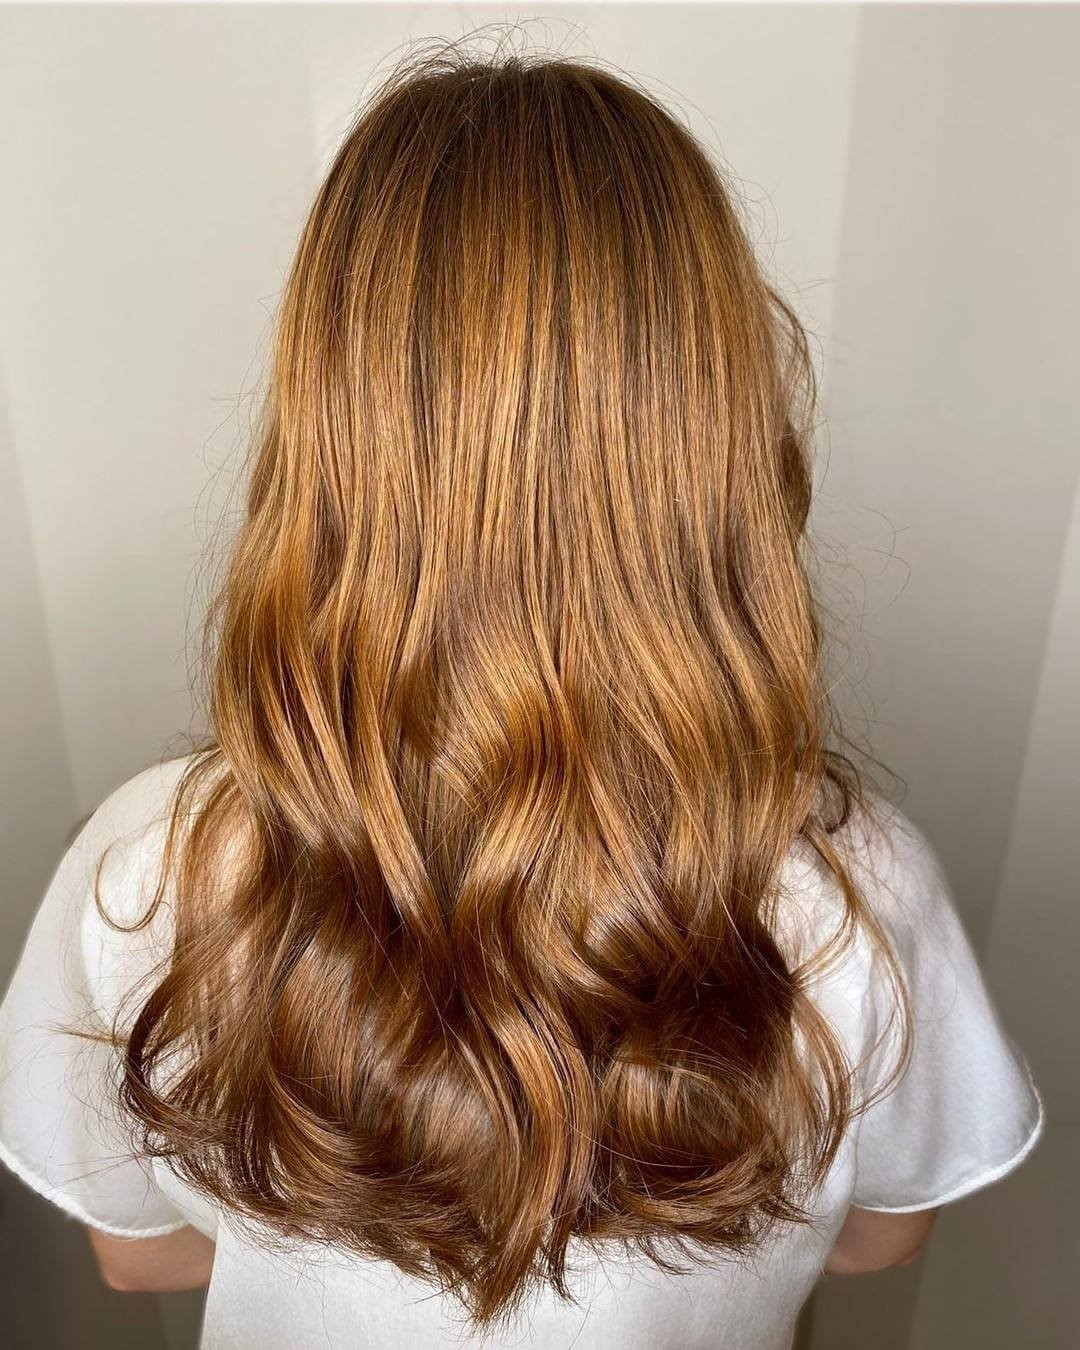 Schwarzkopf Professional - We LOVE a healthy bounce 🙌�This stunning colour service was finished with with a customised #FibreClinix Tribond Treatment!

*Formula* 👉 @costellopeluqueria used #IGORAROYAL...